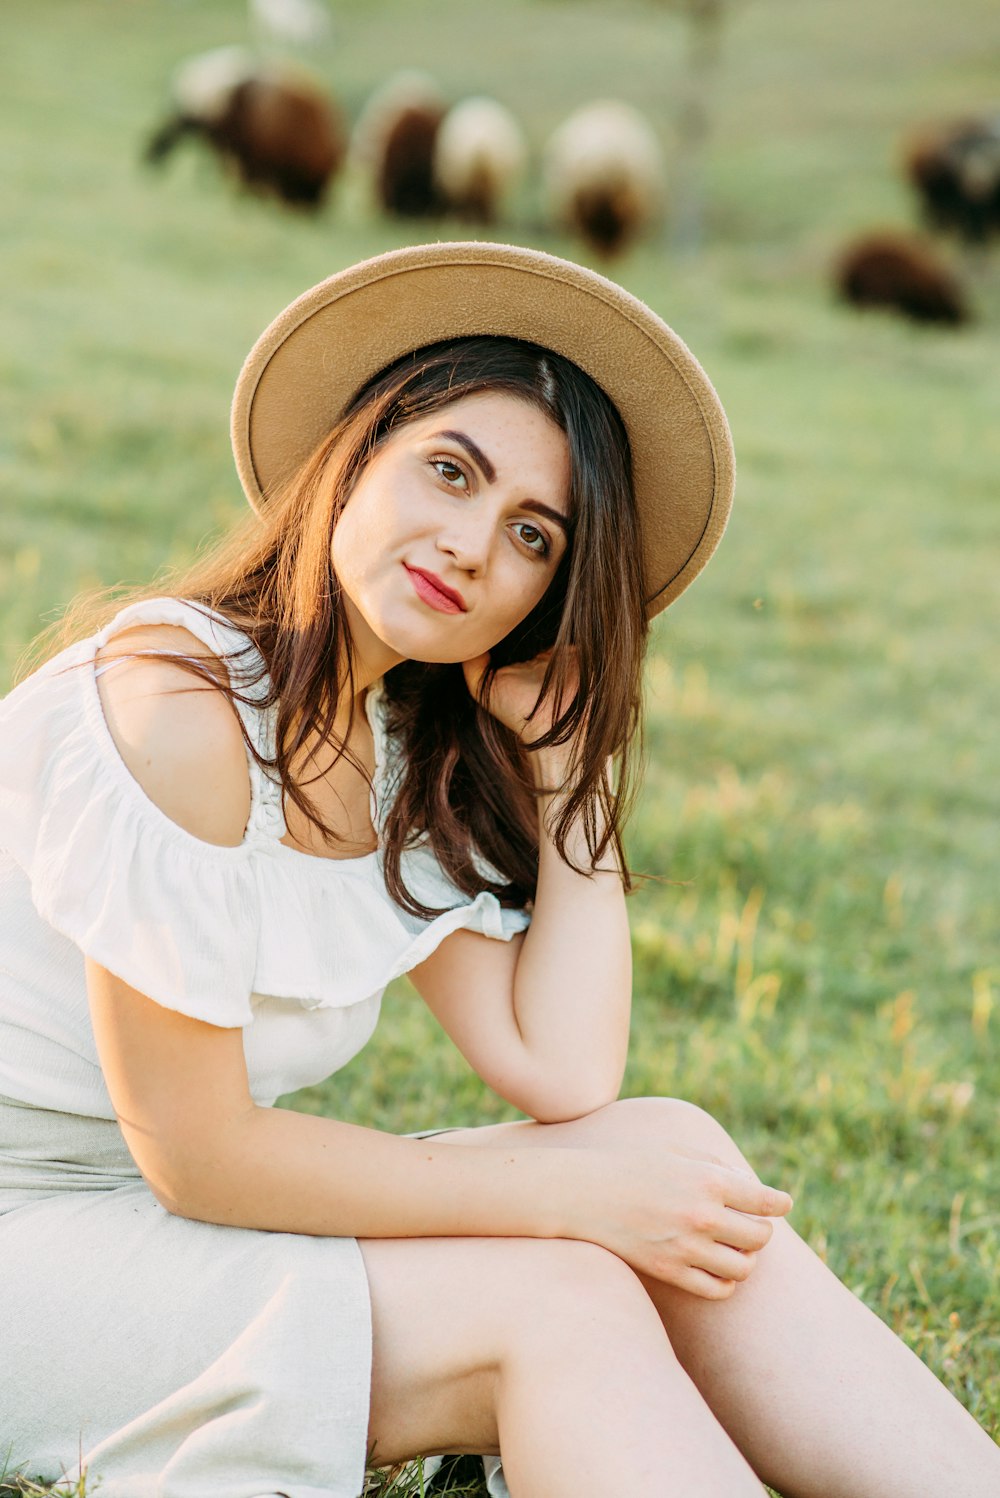 woman in white tank top and brown hat sitting on green grass field during daytime